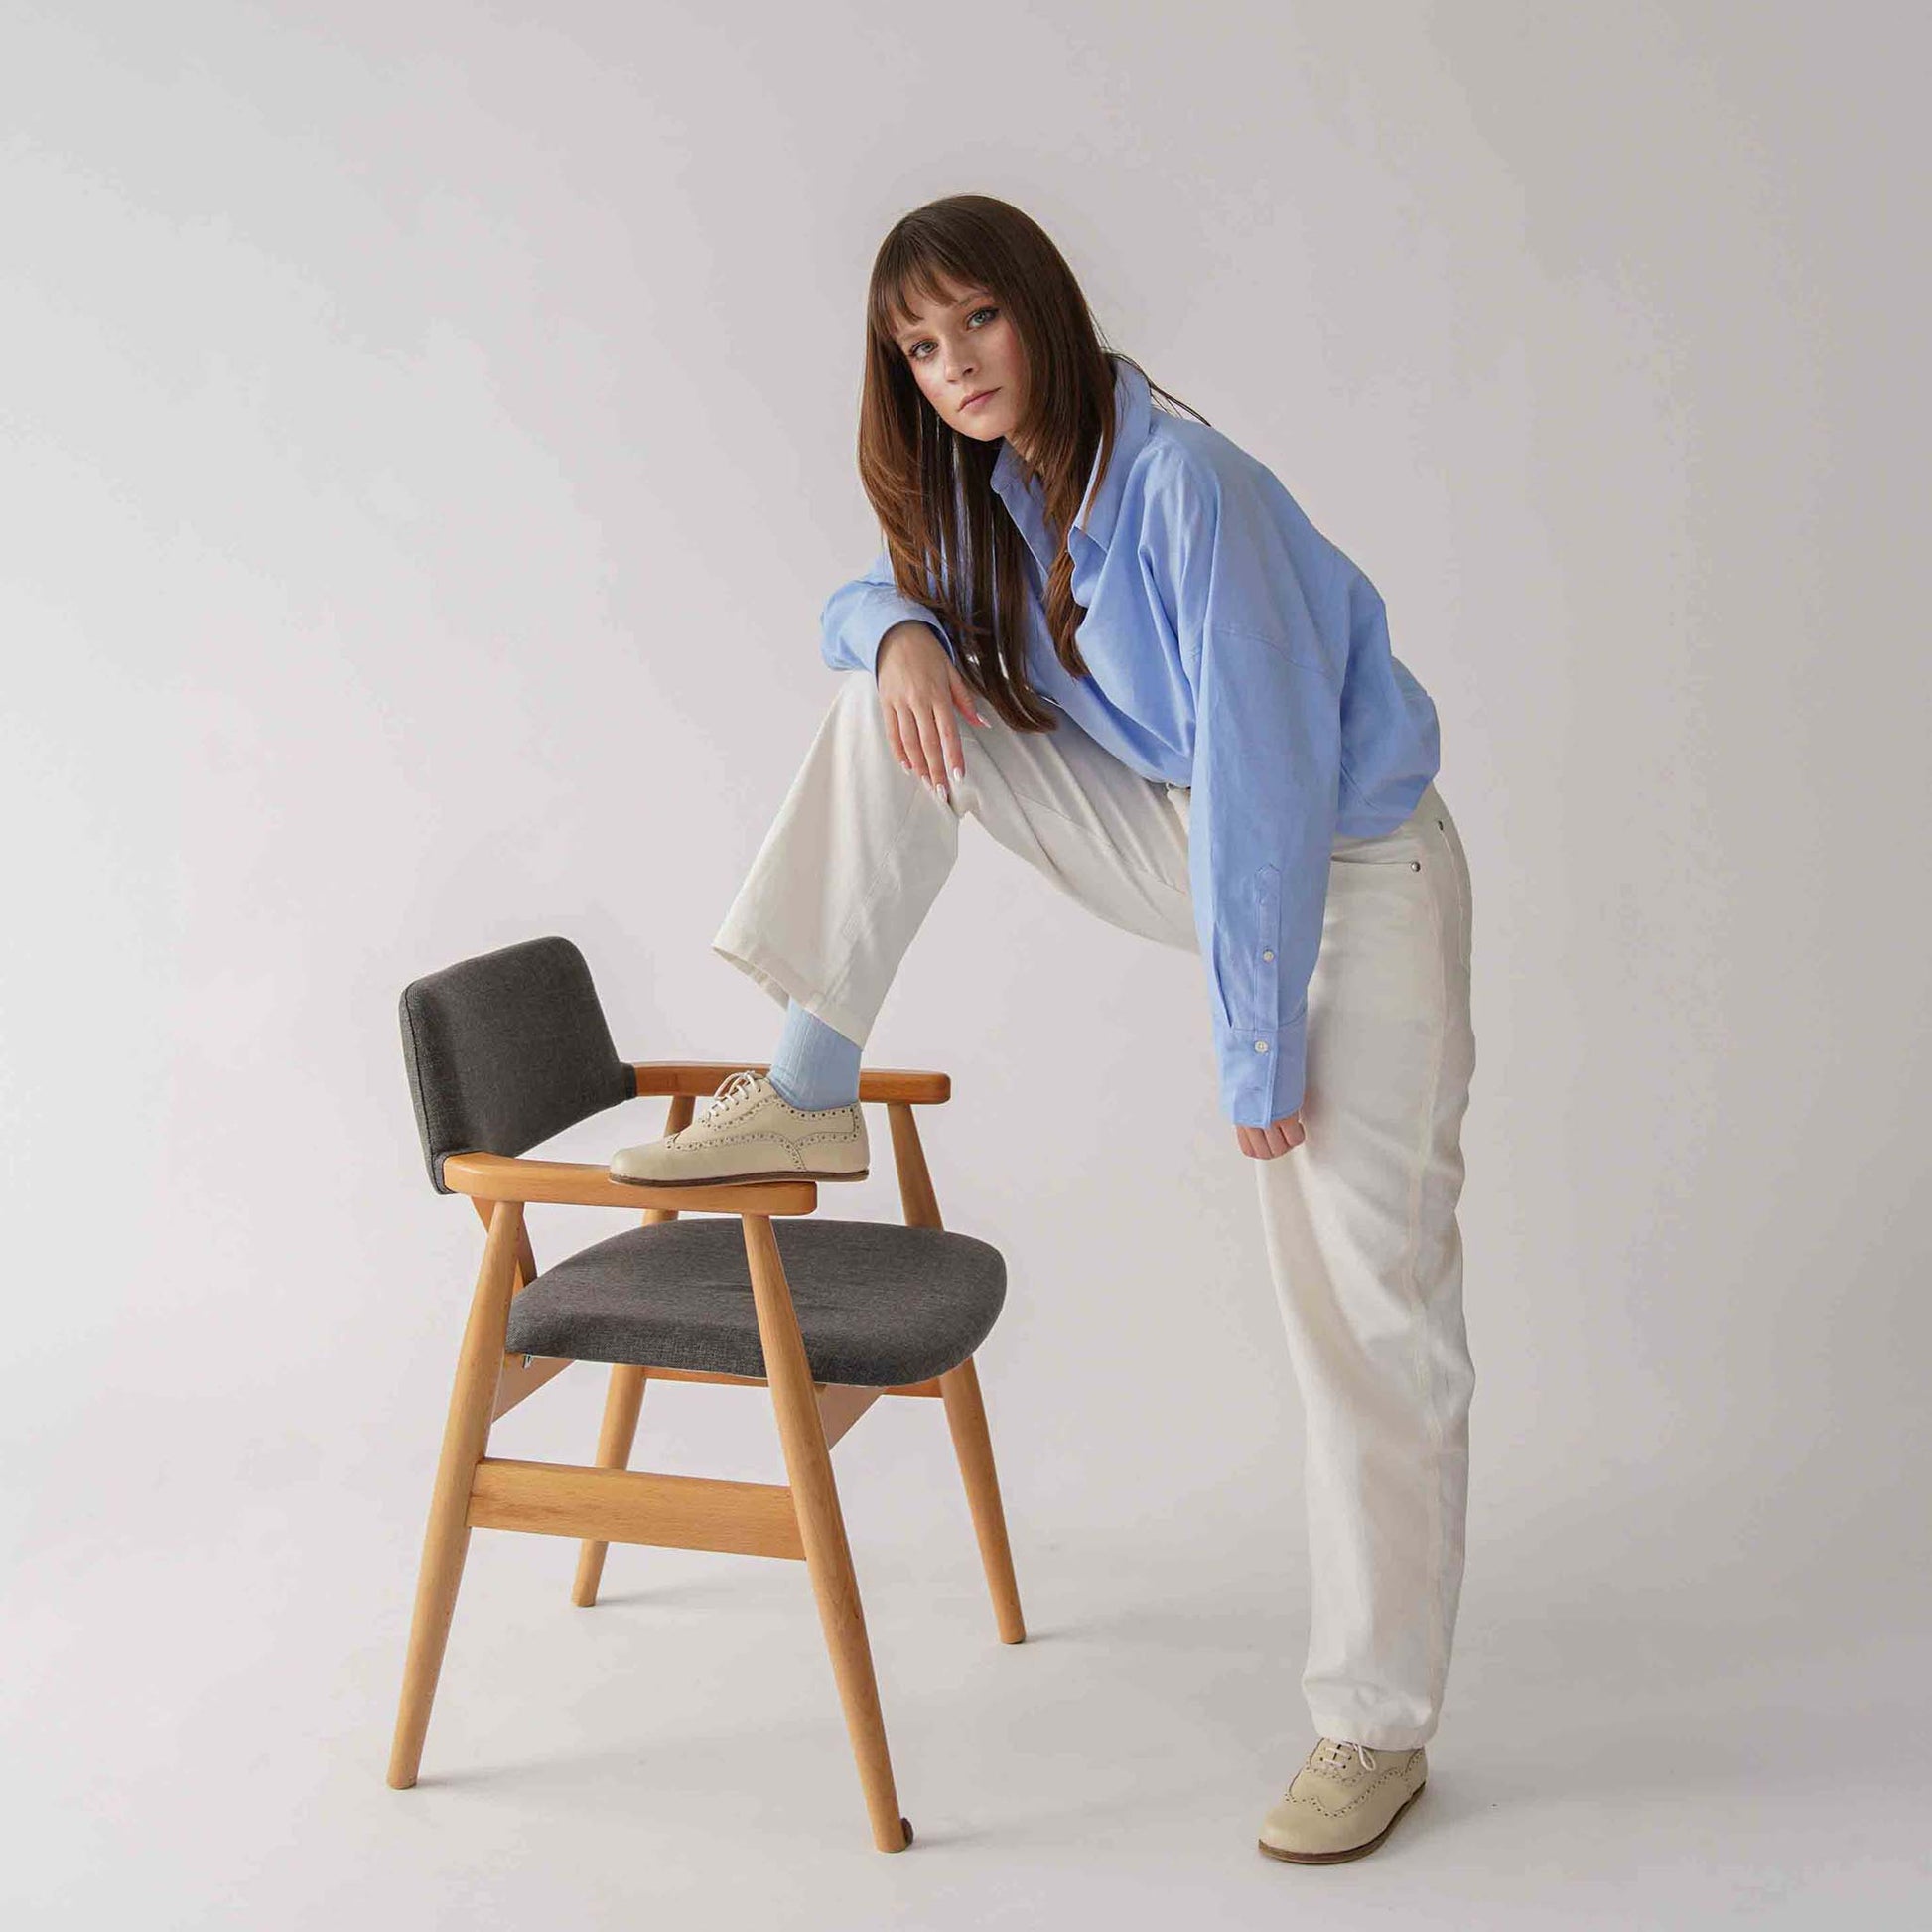 Woman standing with one foot on a chair, wearing beige Doris leather barefoot women's oxfords and a blue shirt with white pants.